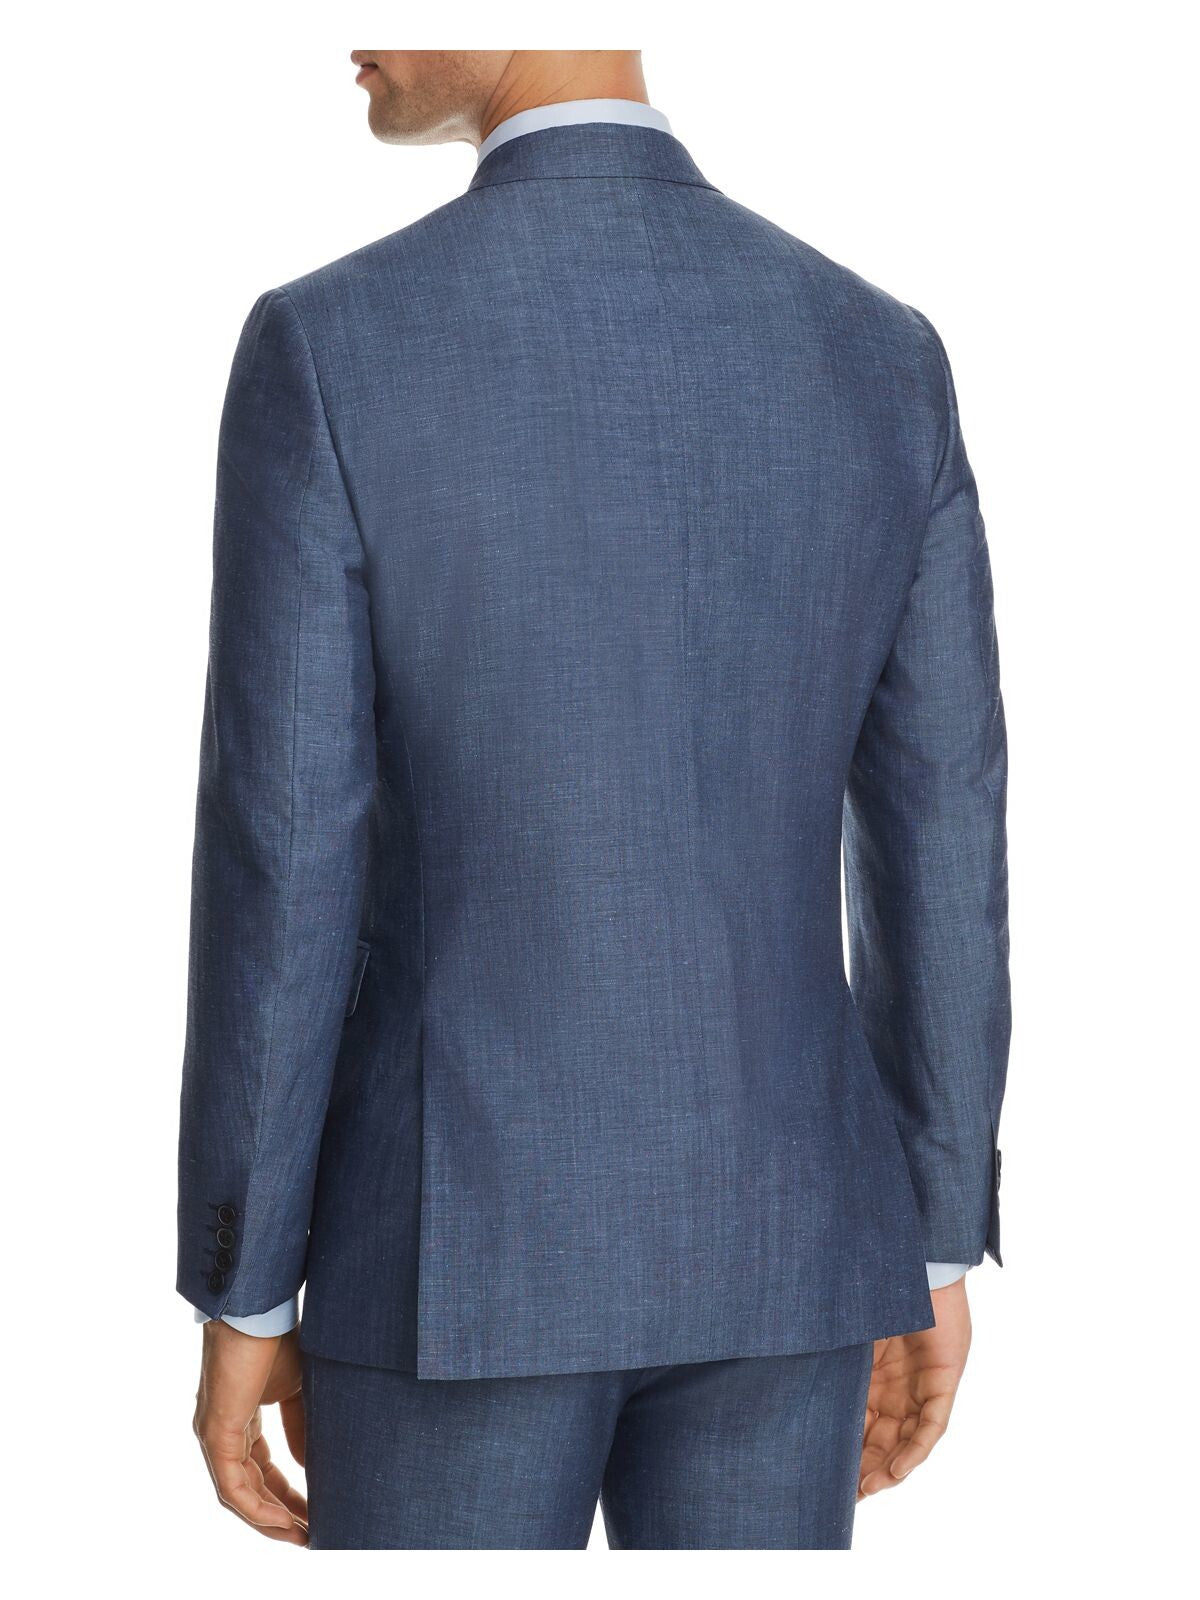 THEORY Mens Chambers Blue Single Breasted, Slim Fit Suit Separate Blazer Jacket 46R